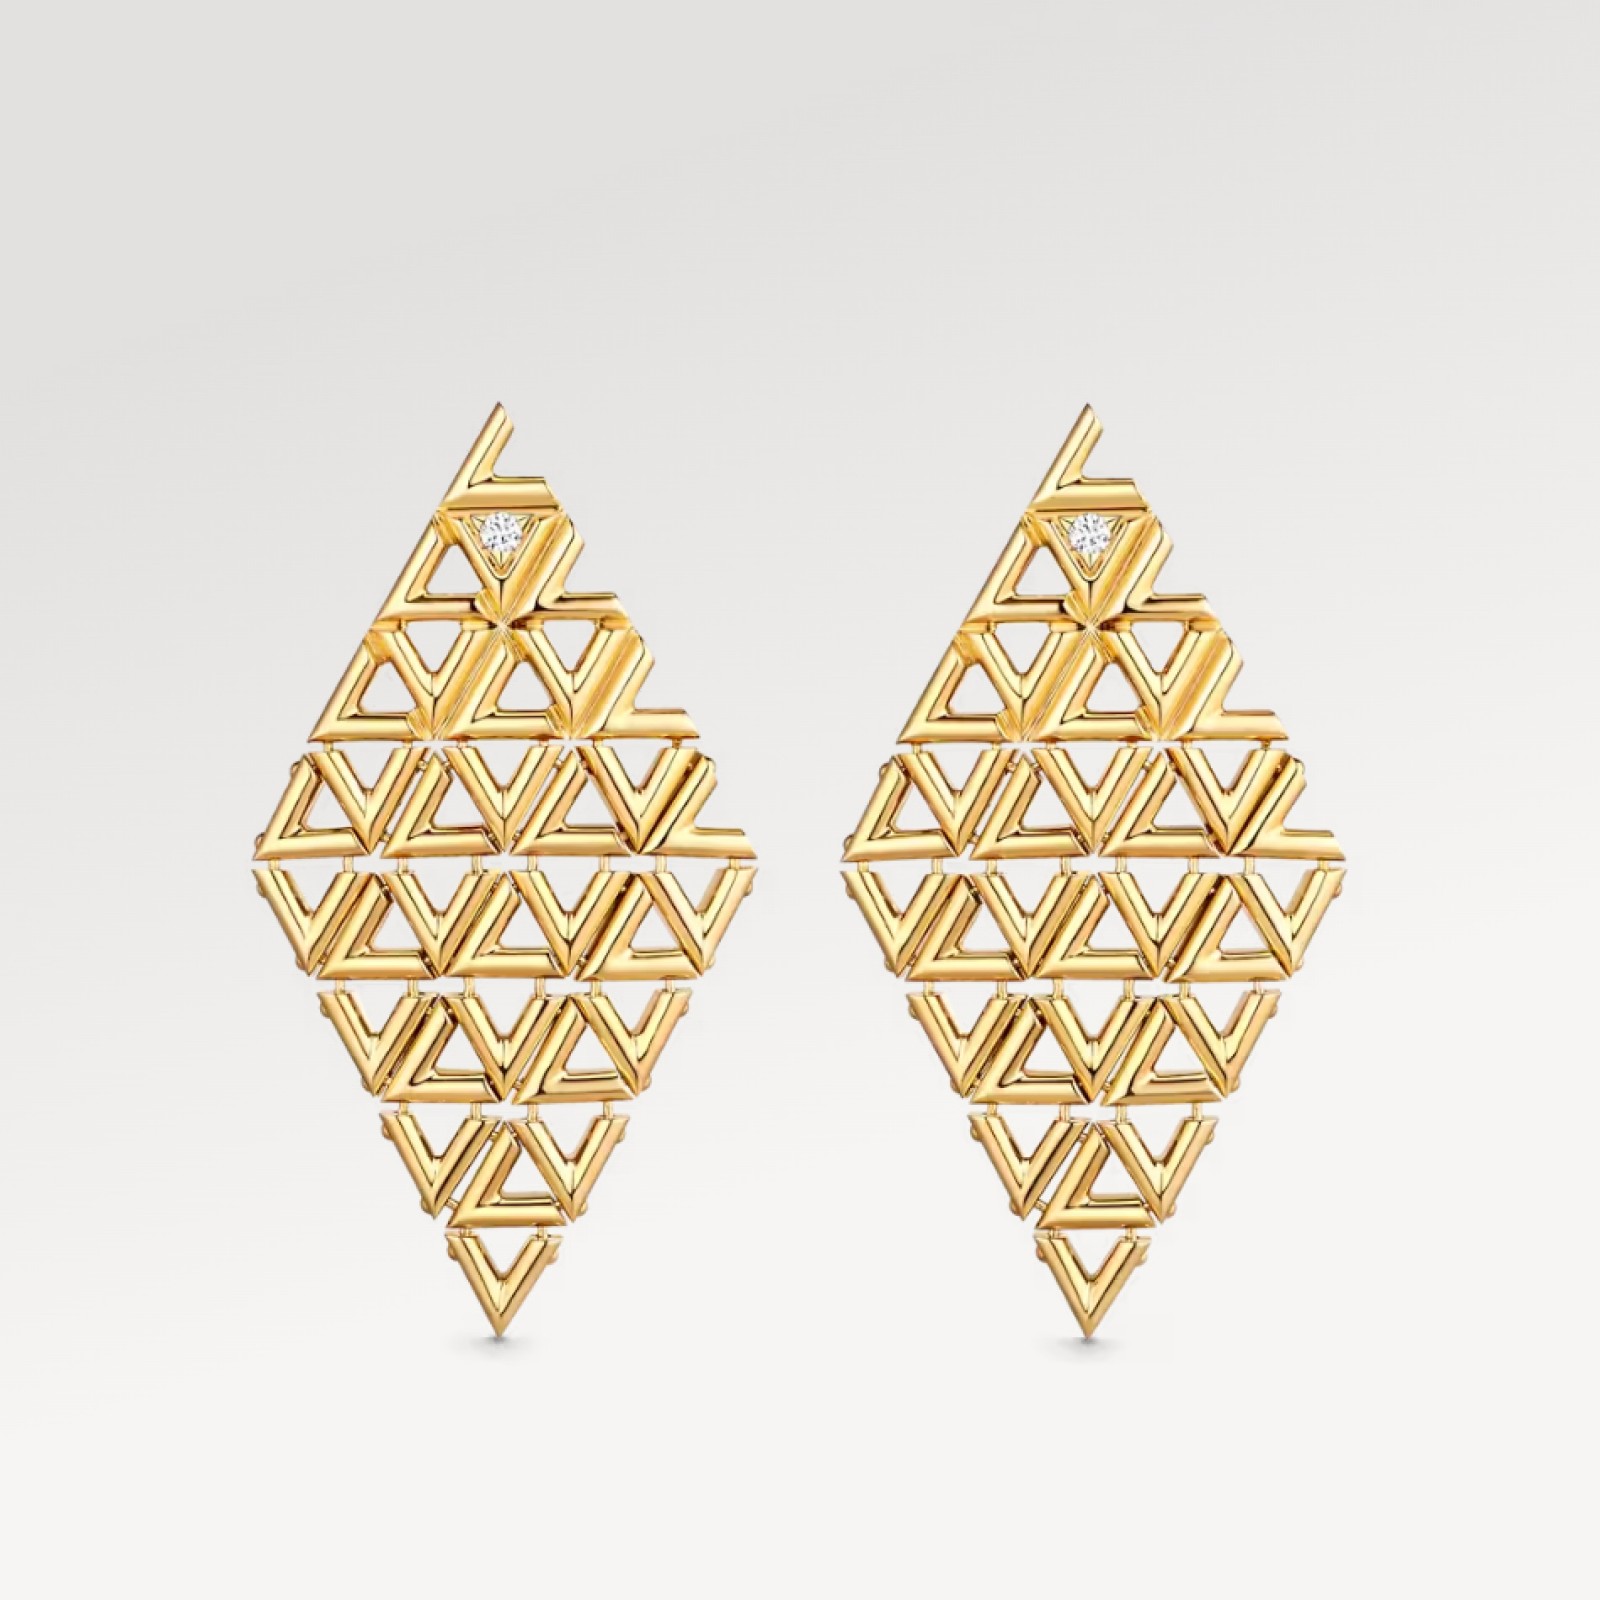 LV Volt Mesh Earrings, Yellow Gold And Diamonds